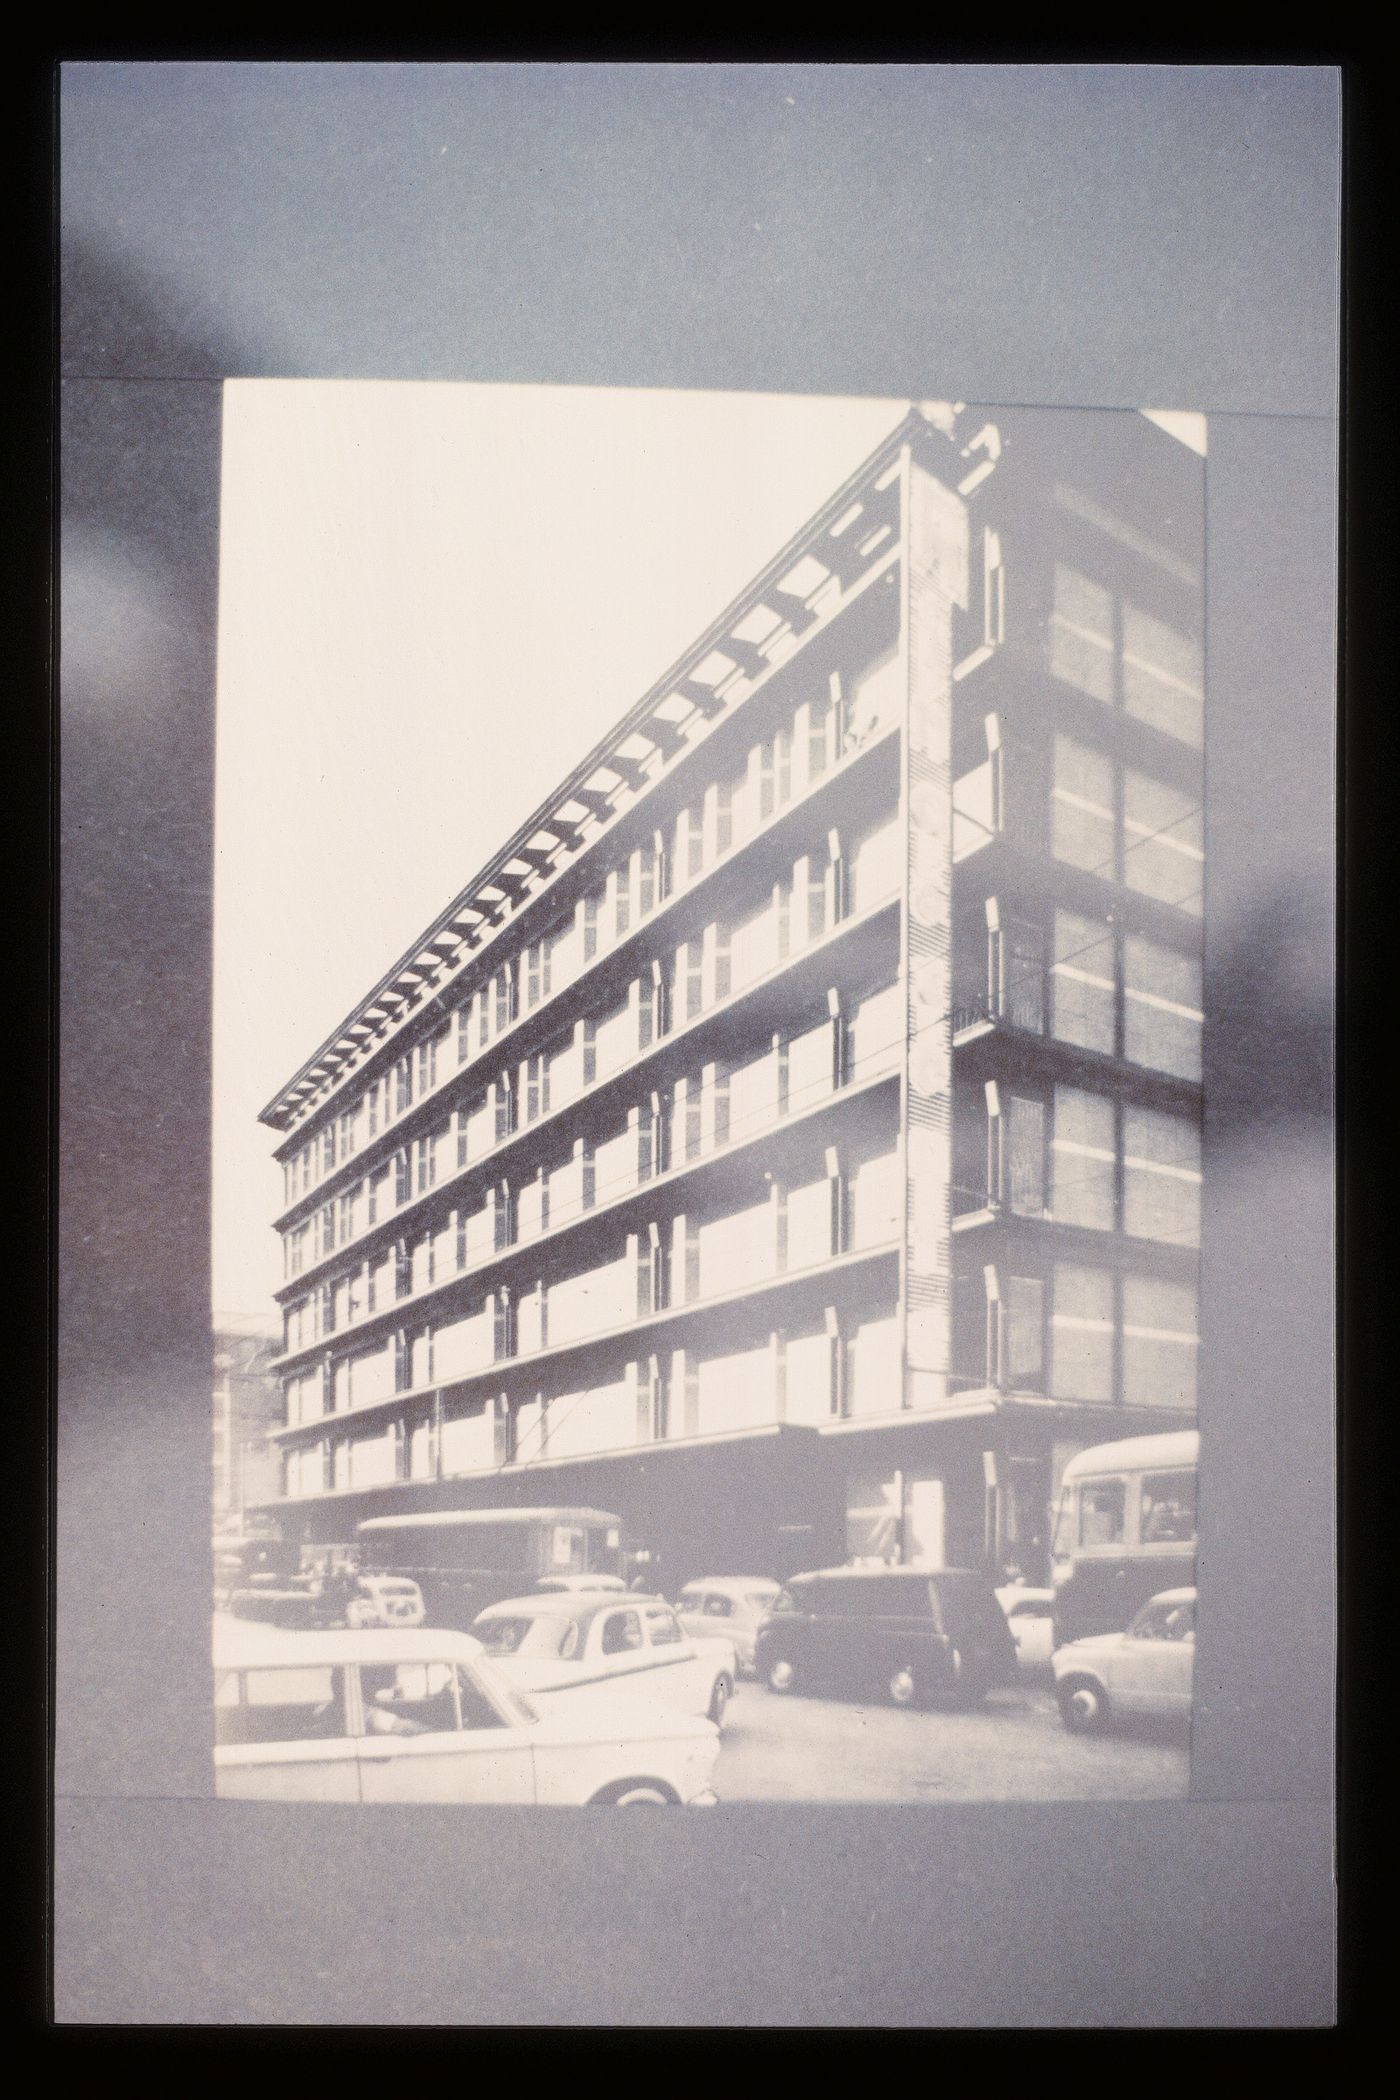 Slide of a photograph of Rinascente Department Store, Rome, by Franco Albini and Franca Helg